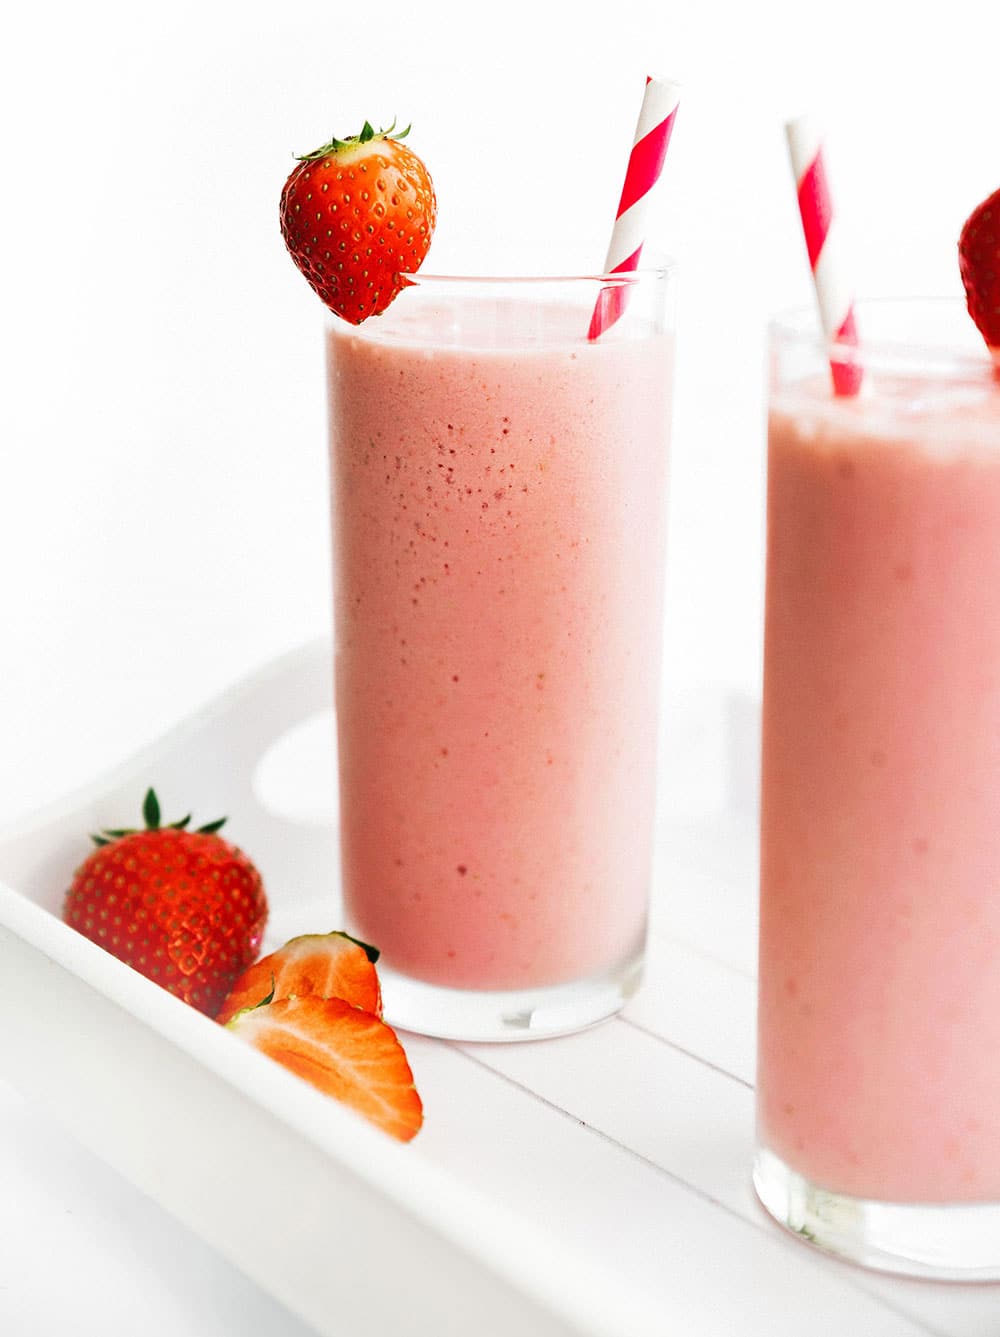 Two tall glasses filled with strawberry cottage cheese smoothies and topped with strawberries